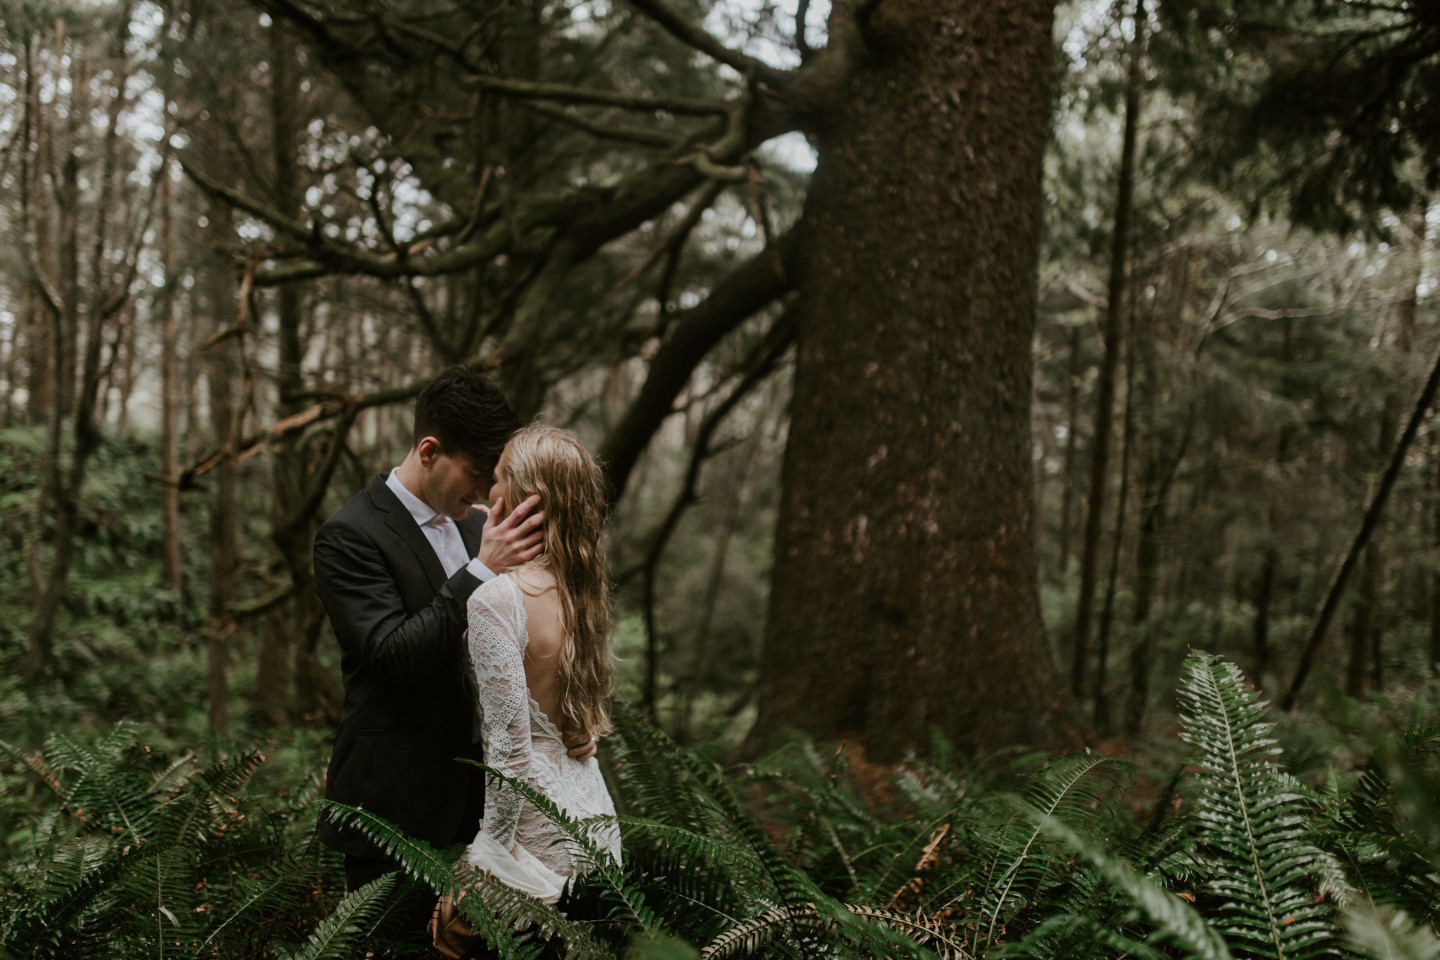 Hannah and Grant stand in the ferns in Cannon Beach, Oregon. Wedding photography in Portland Oregon by Sienna Plus Josh.